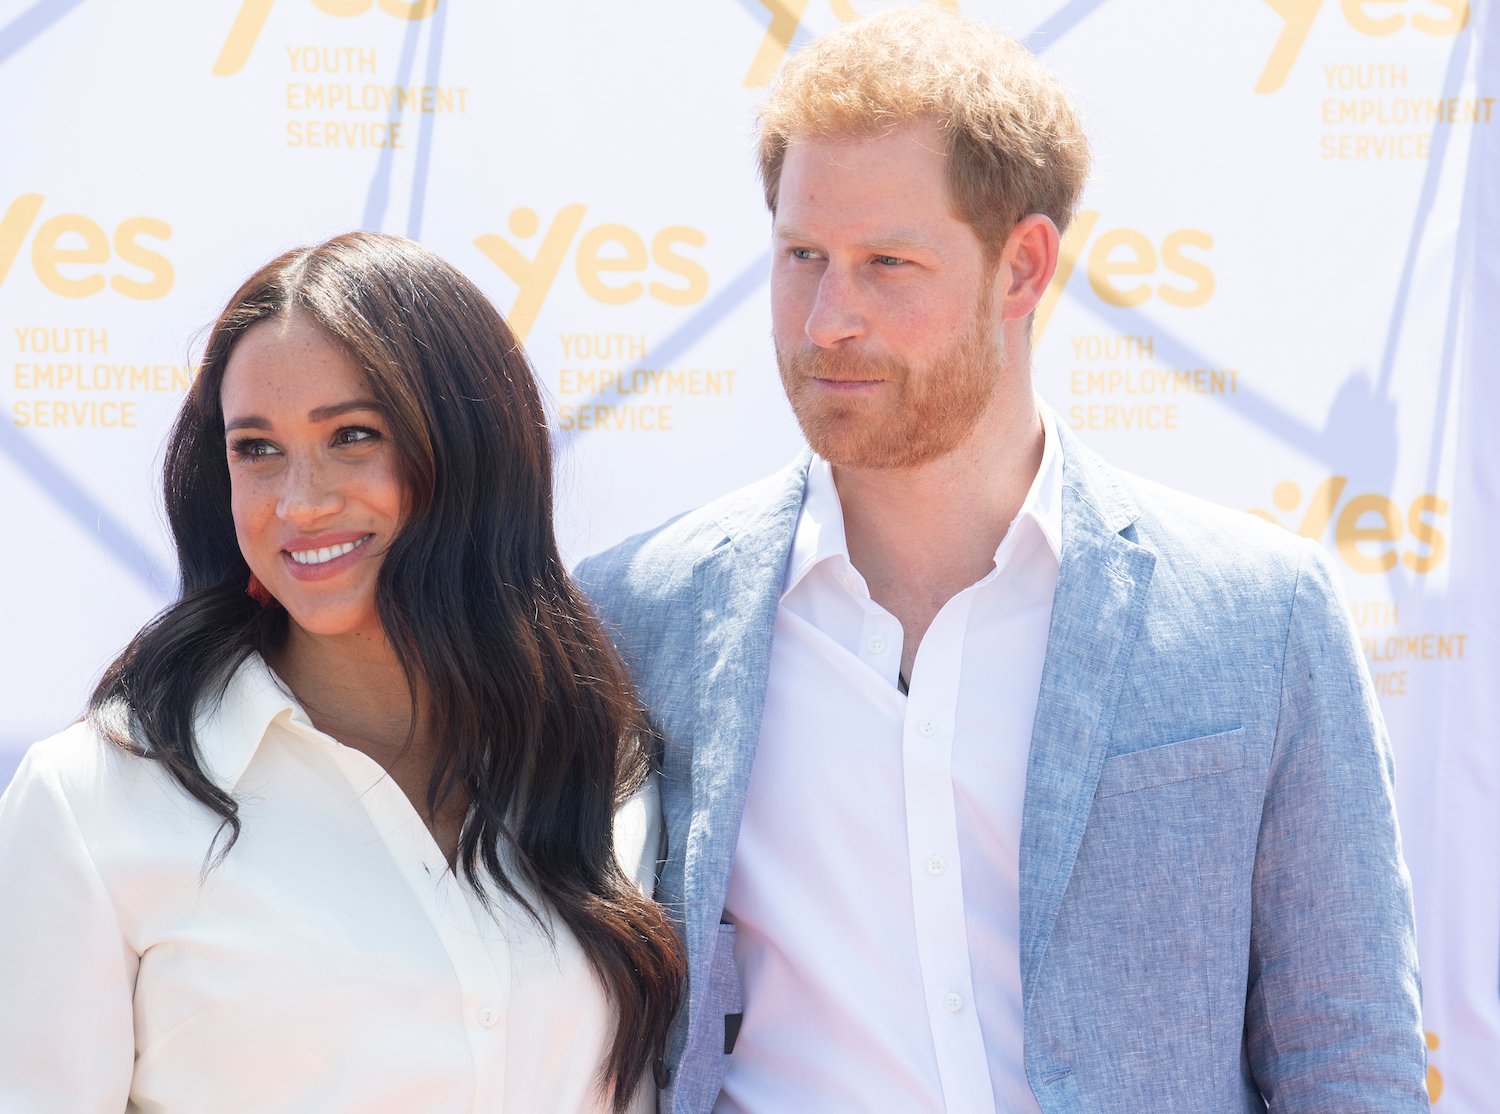 Prince Harry and Meghan Markle visit Tembisa township in Johannesburg, South Africa